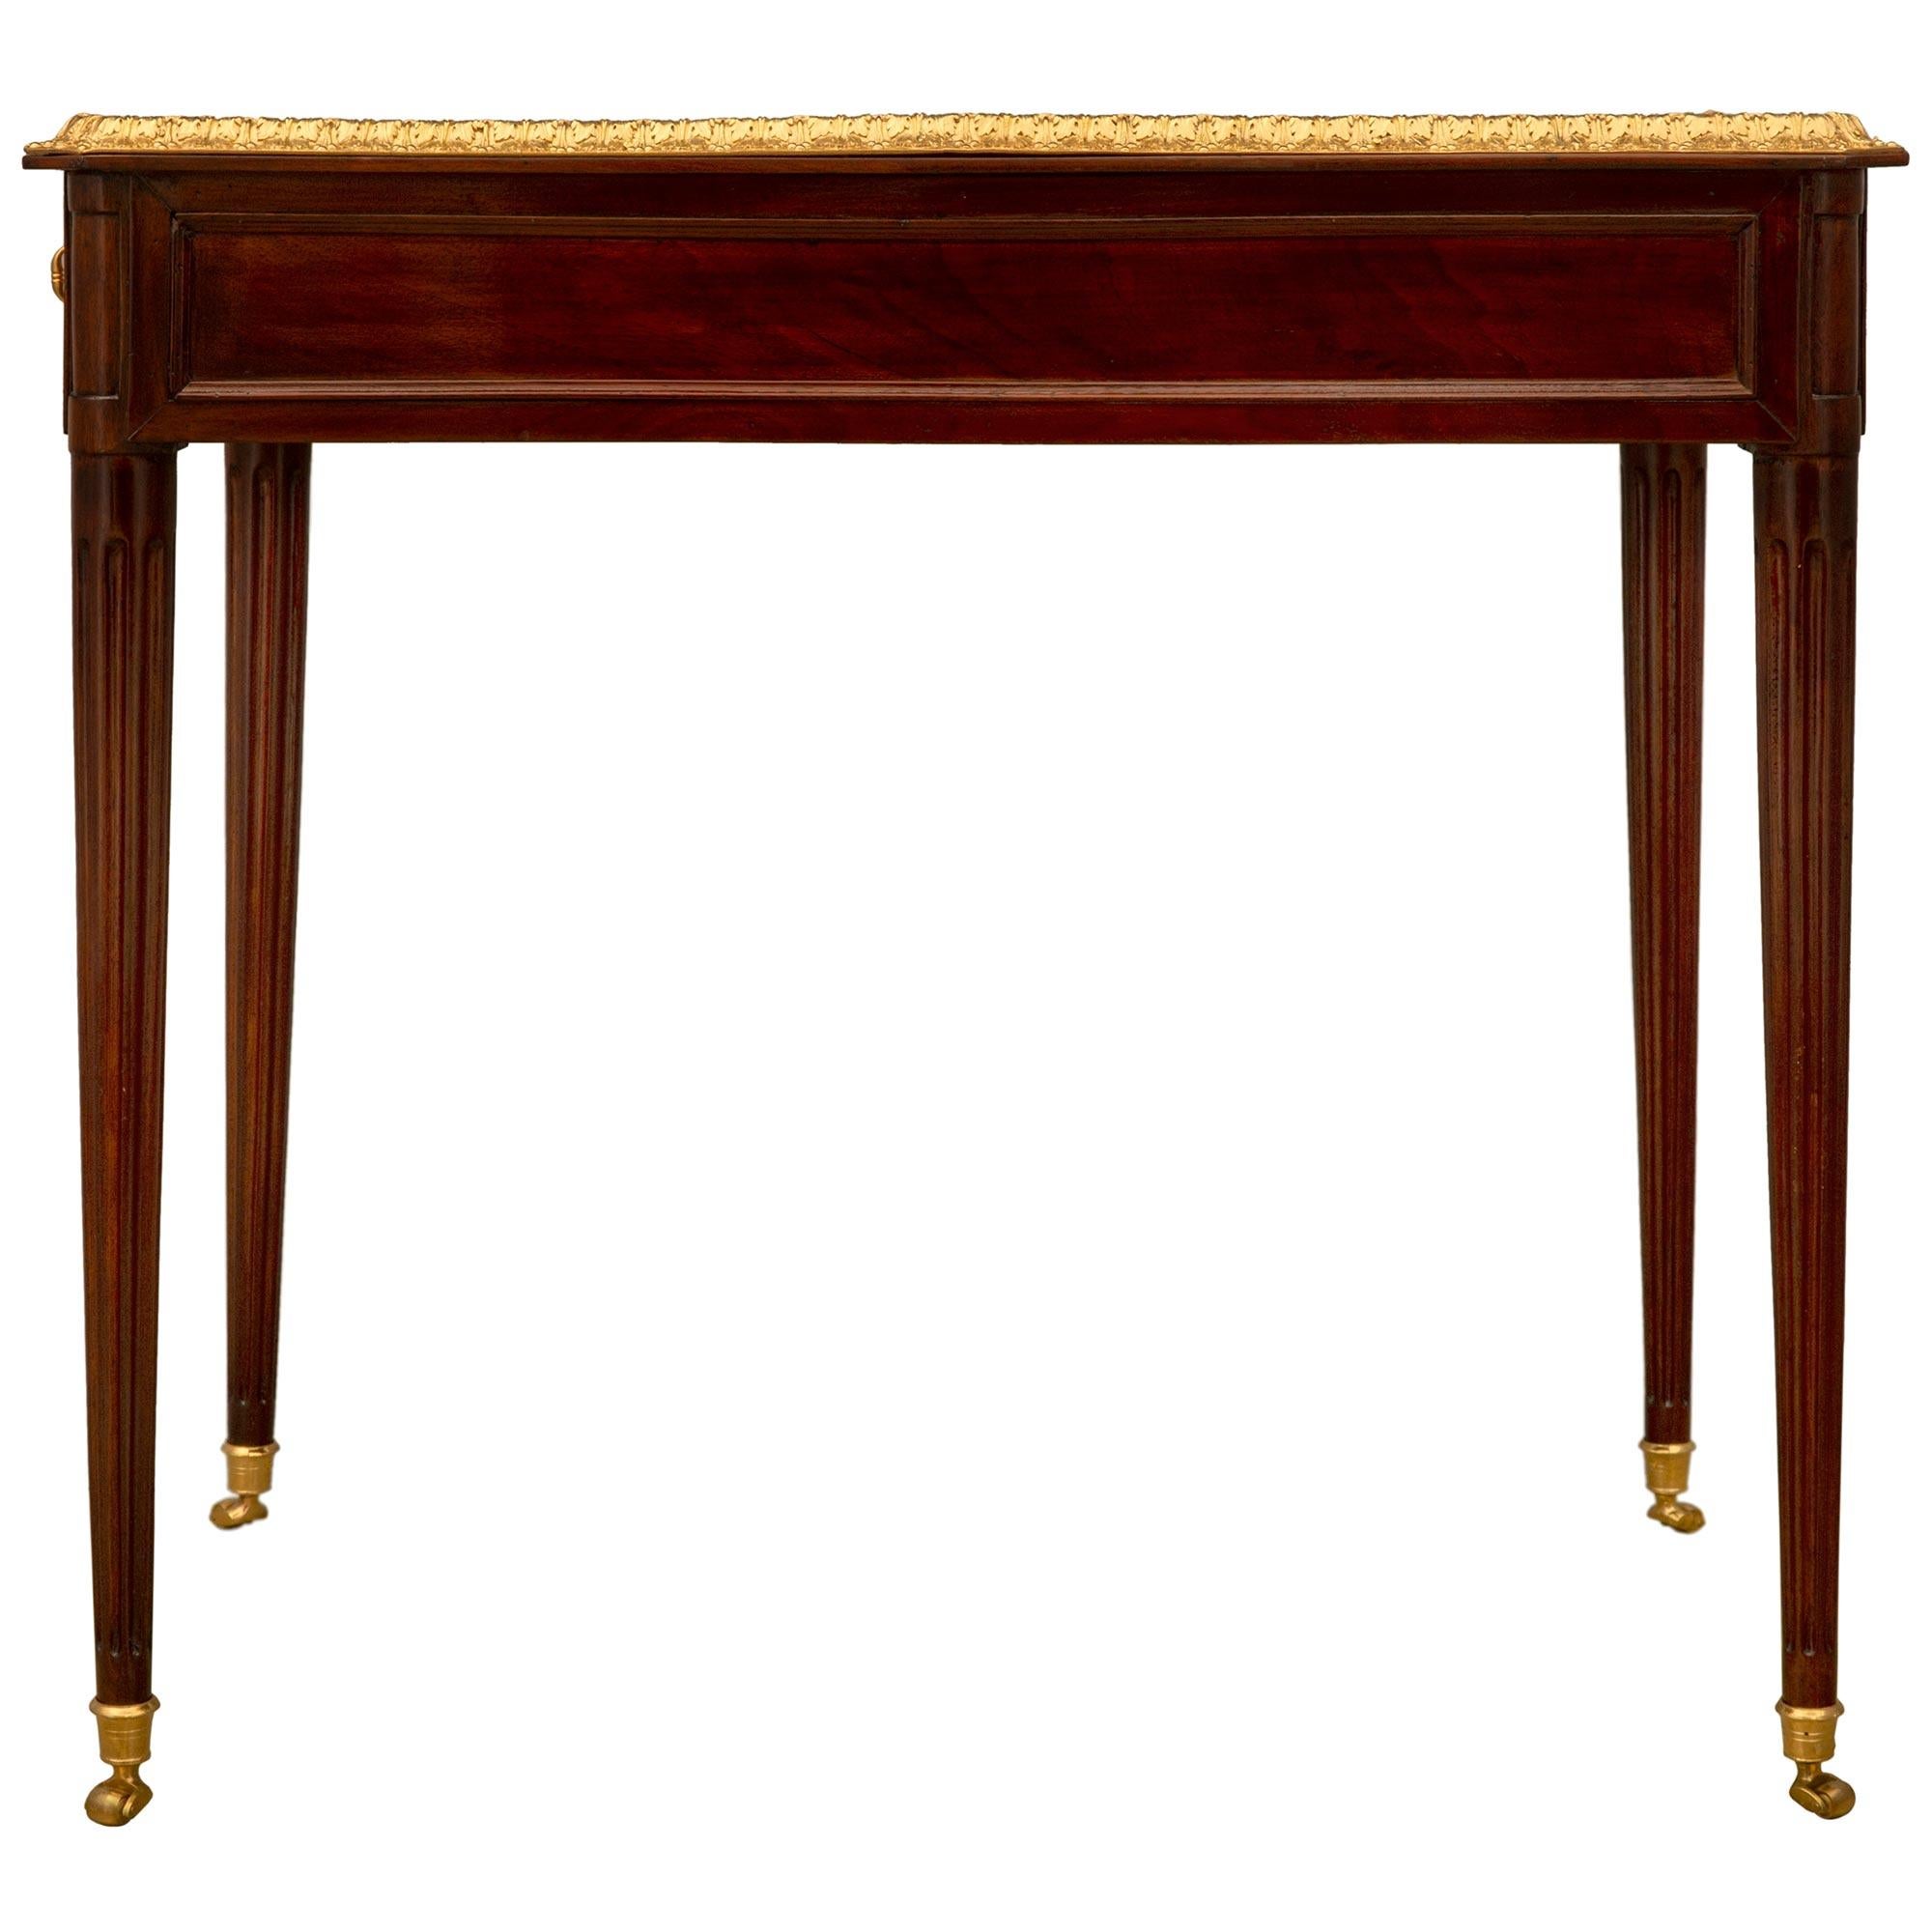 French 18th Century Louis XVI Period Mahogany and Ormolu Side Table / Desk For Sale 2